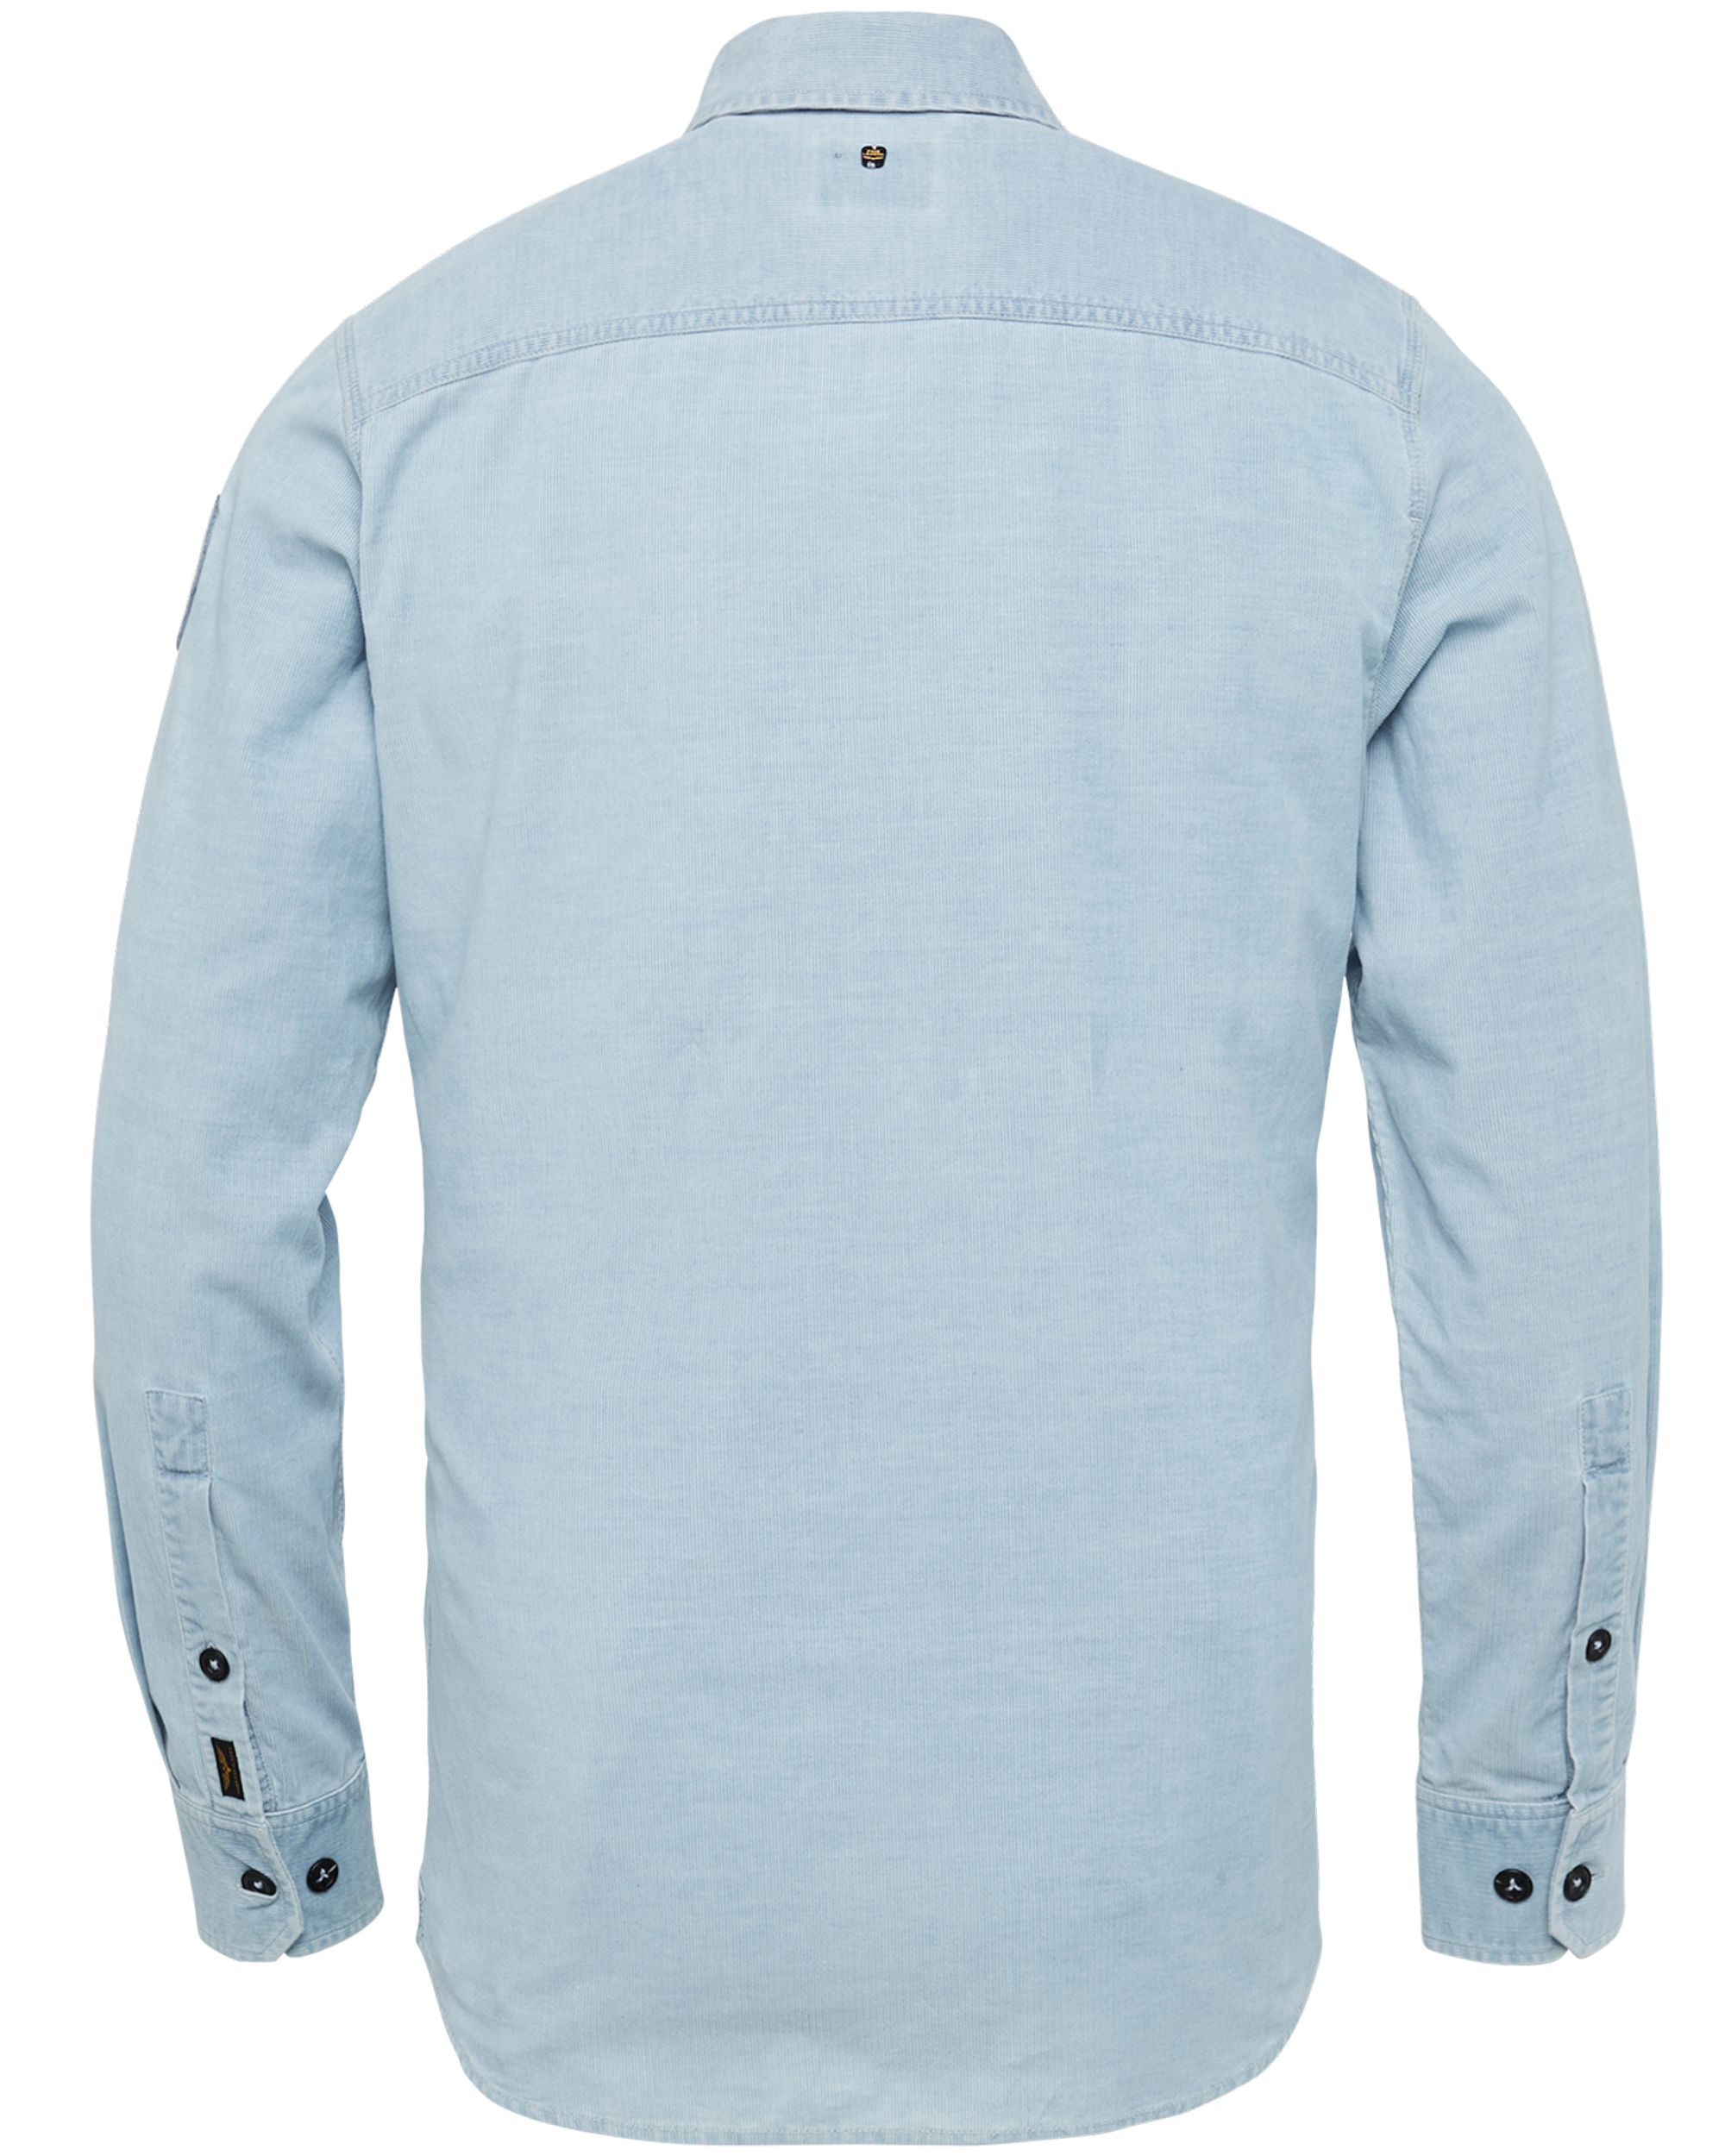 PME Legend Casual Overhemd LM Donker blauw 081951-001-L